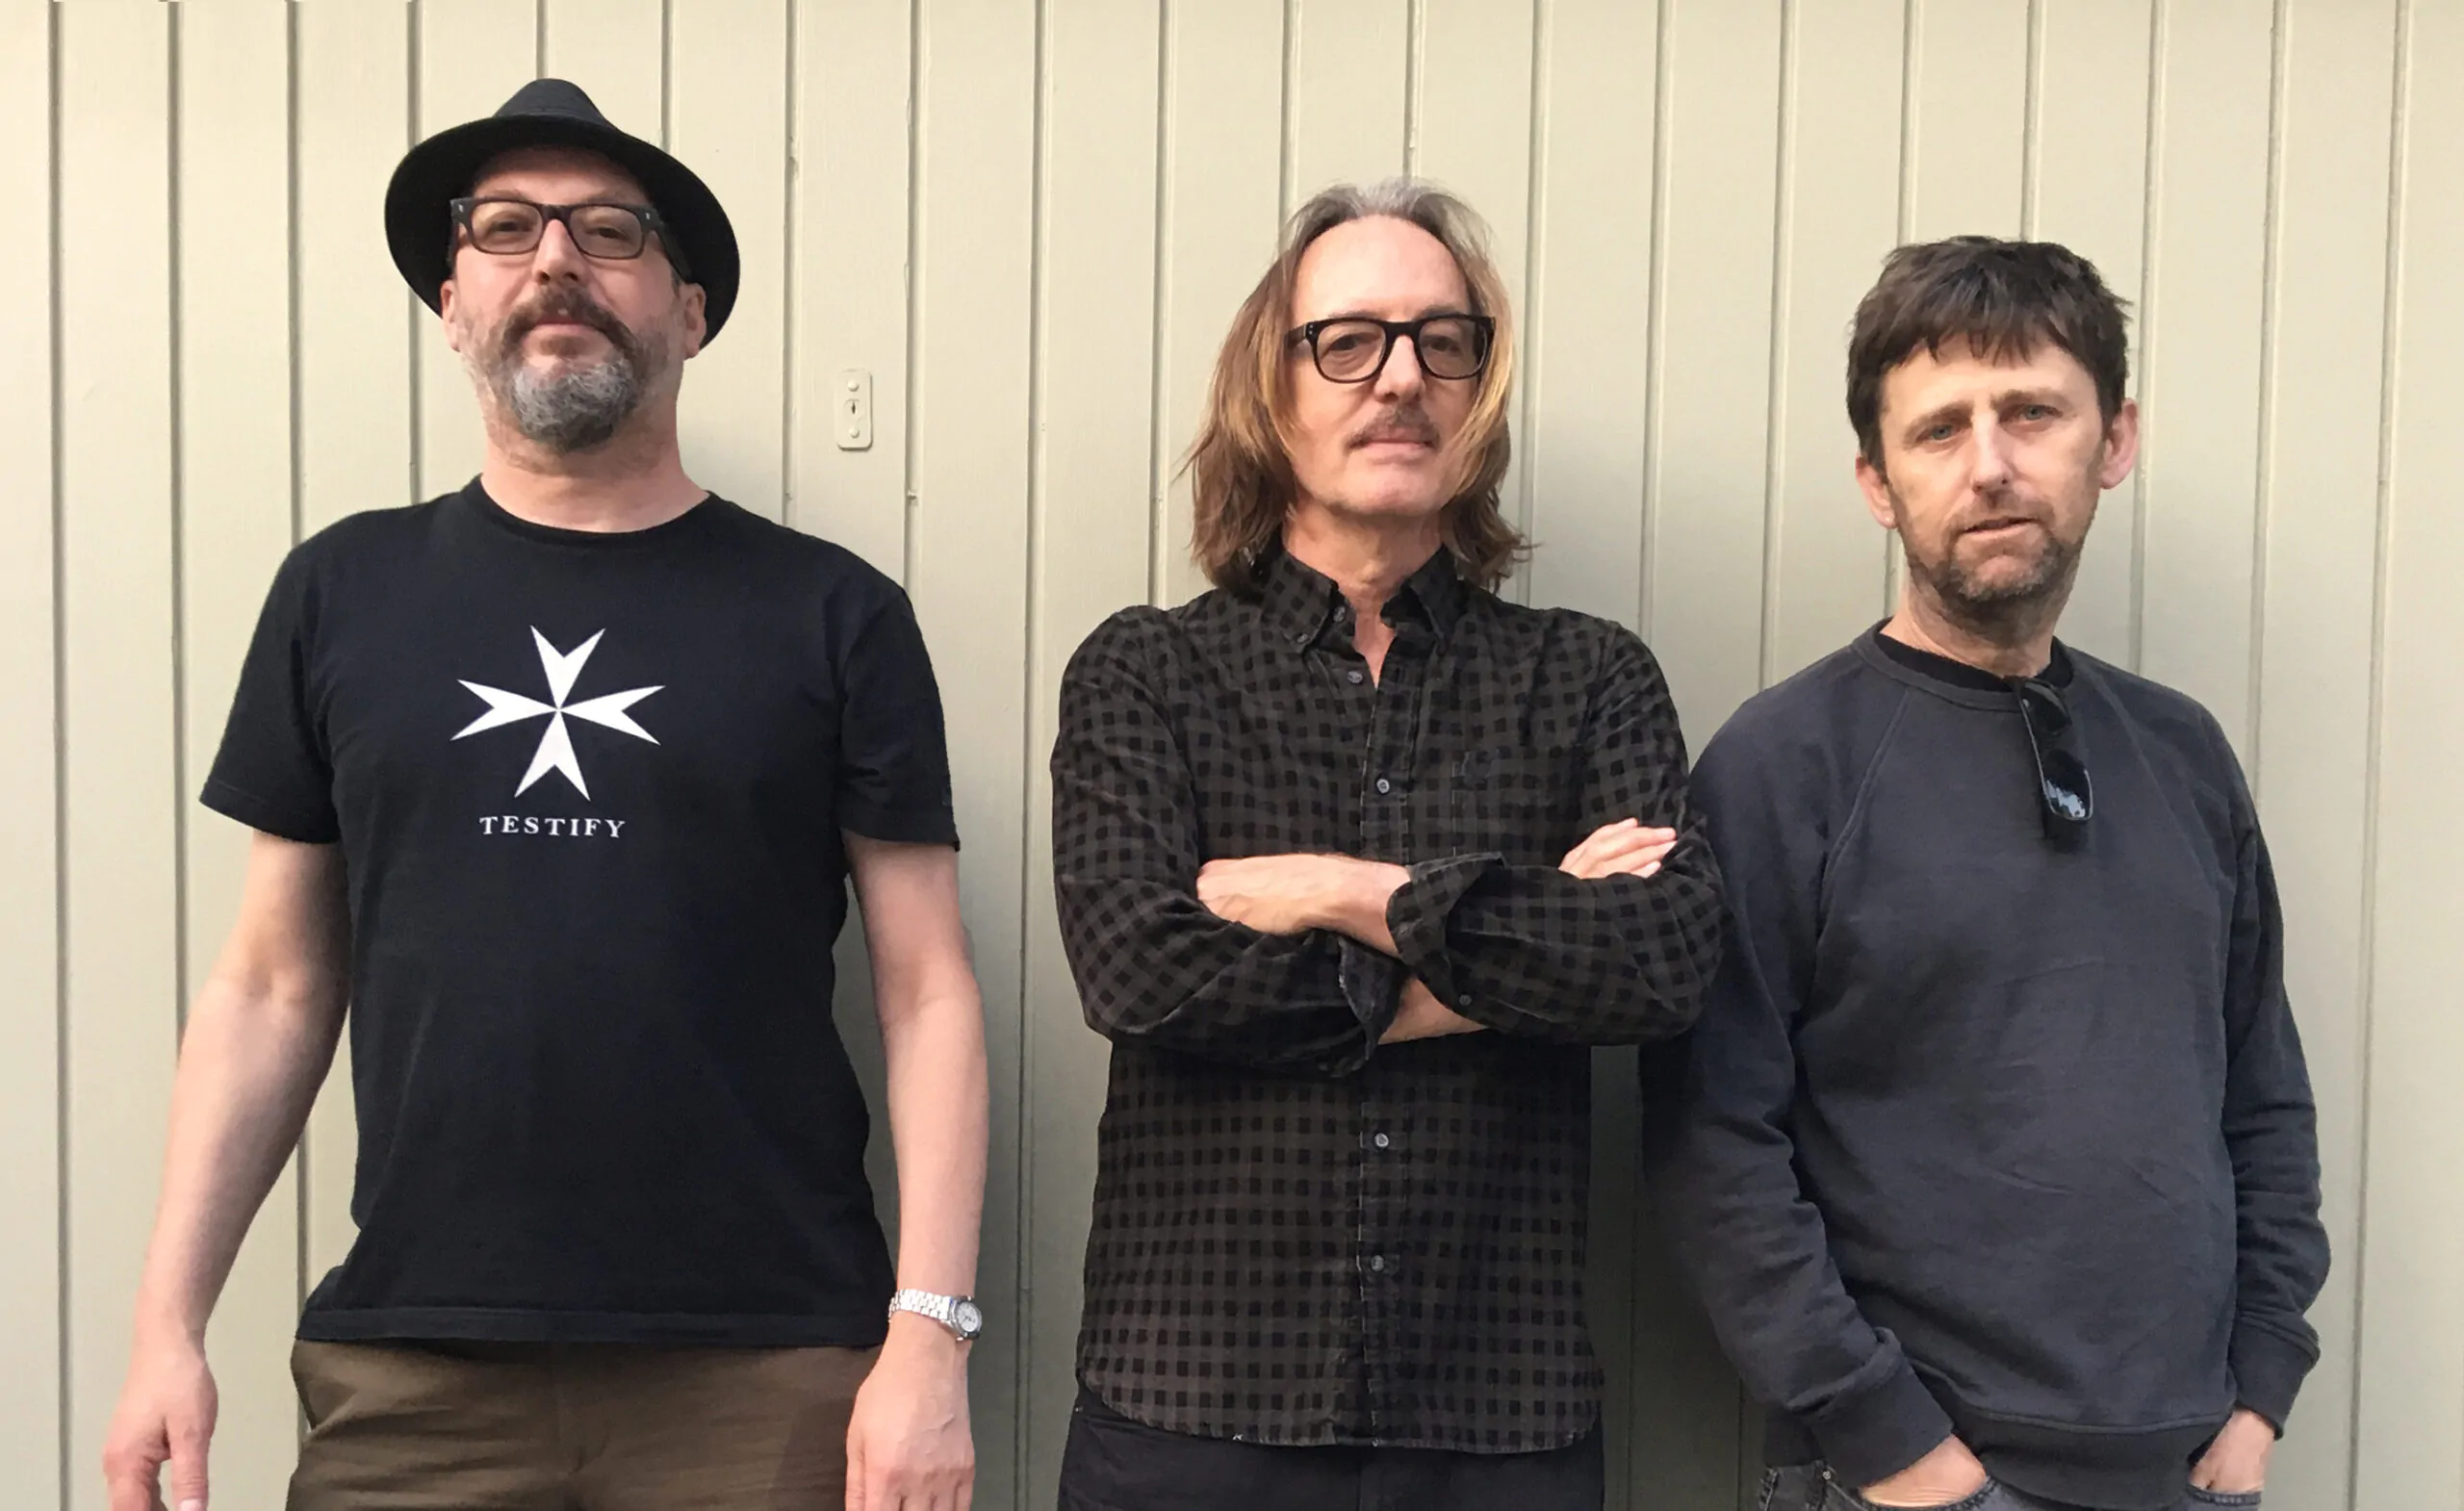 INTERVIEW: Butch Vig on 5 Billion in Diamonds, Garbage, Producing Records & More